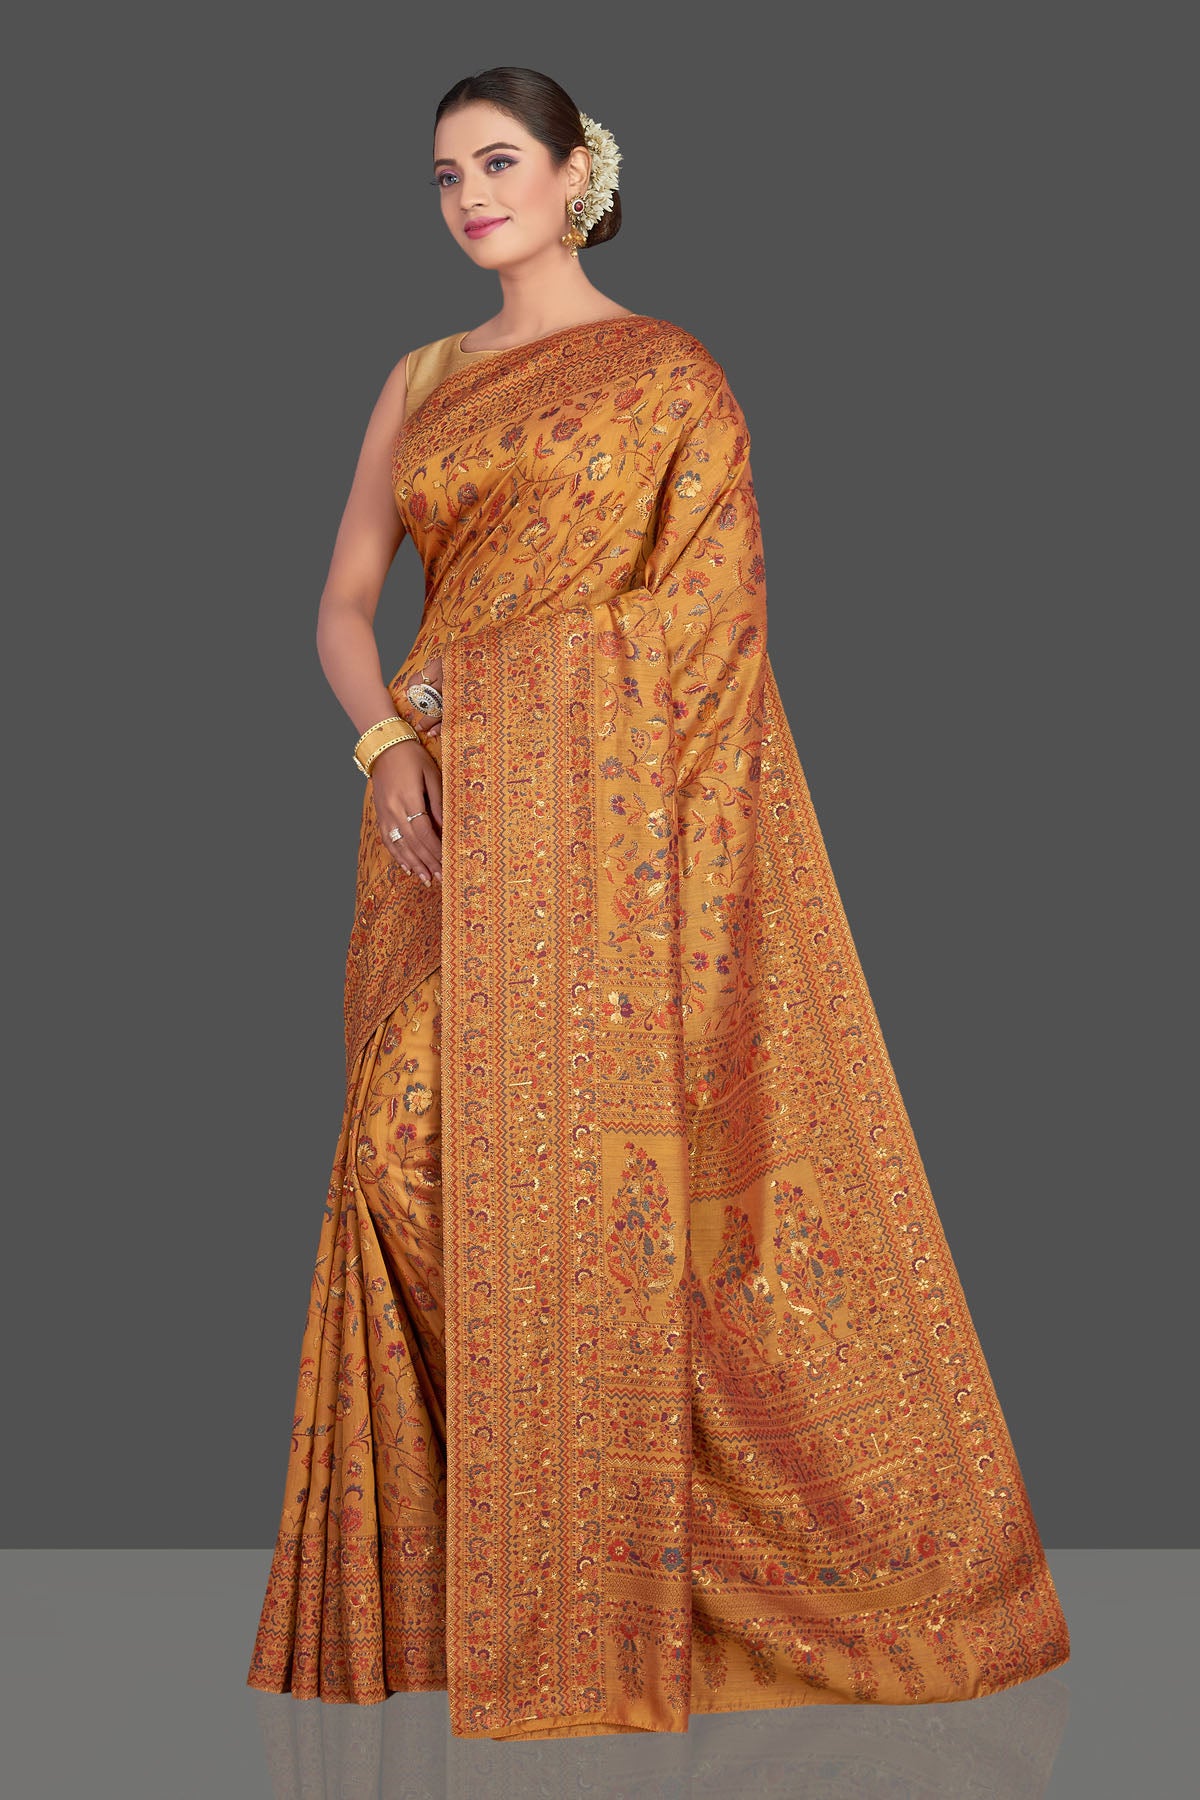 Buy stunning mustard yellow Kani weave sari online in USA. Make your presence felt on special occasions in beautiful embroidered sarees, handwoven saris, pure silk saris, tussar sarees from Pure Elegance Indian saree store in USA.-pallu